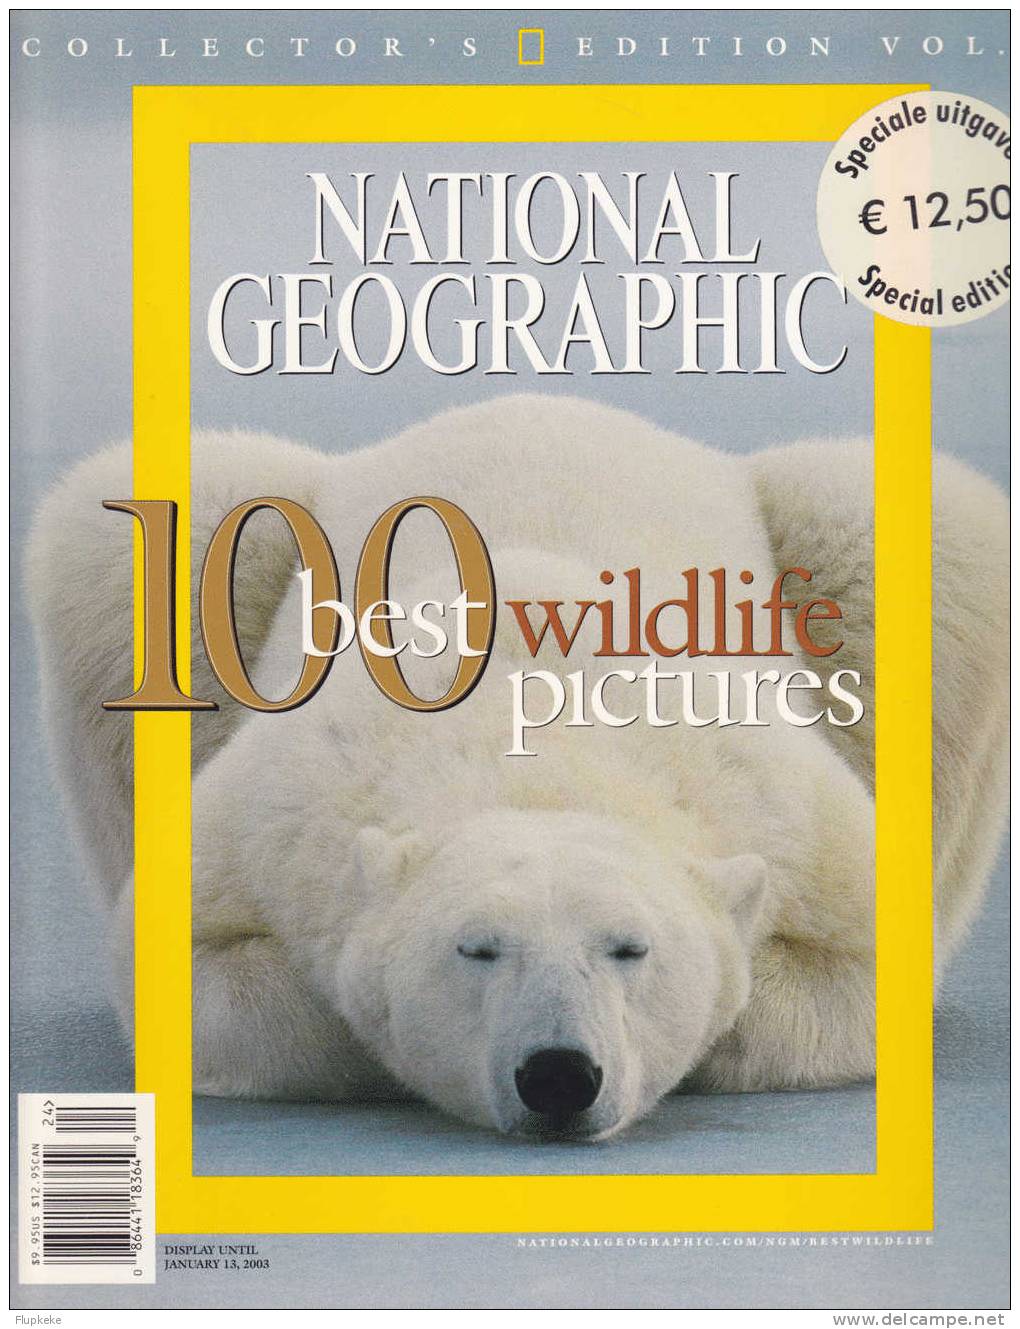 National Geographic Collector´s Edition Vol. 3 January 2003 - Travel/ Exploration